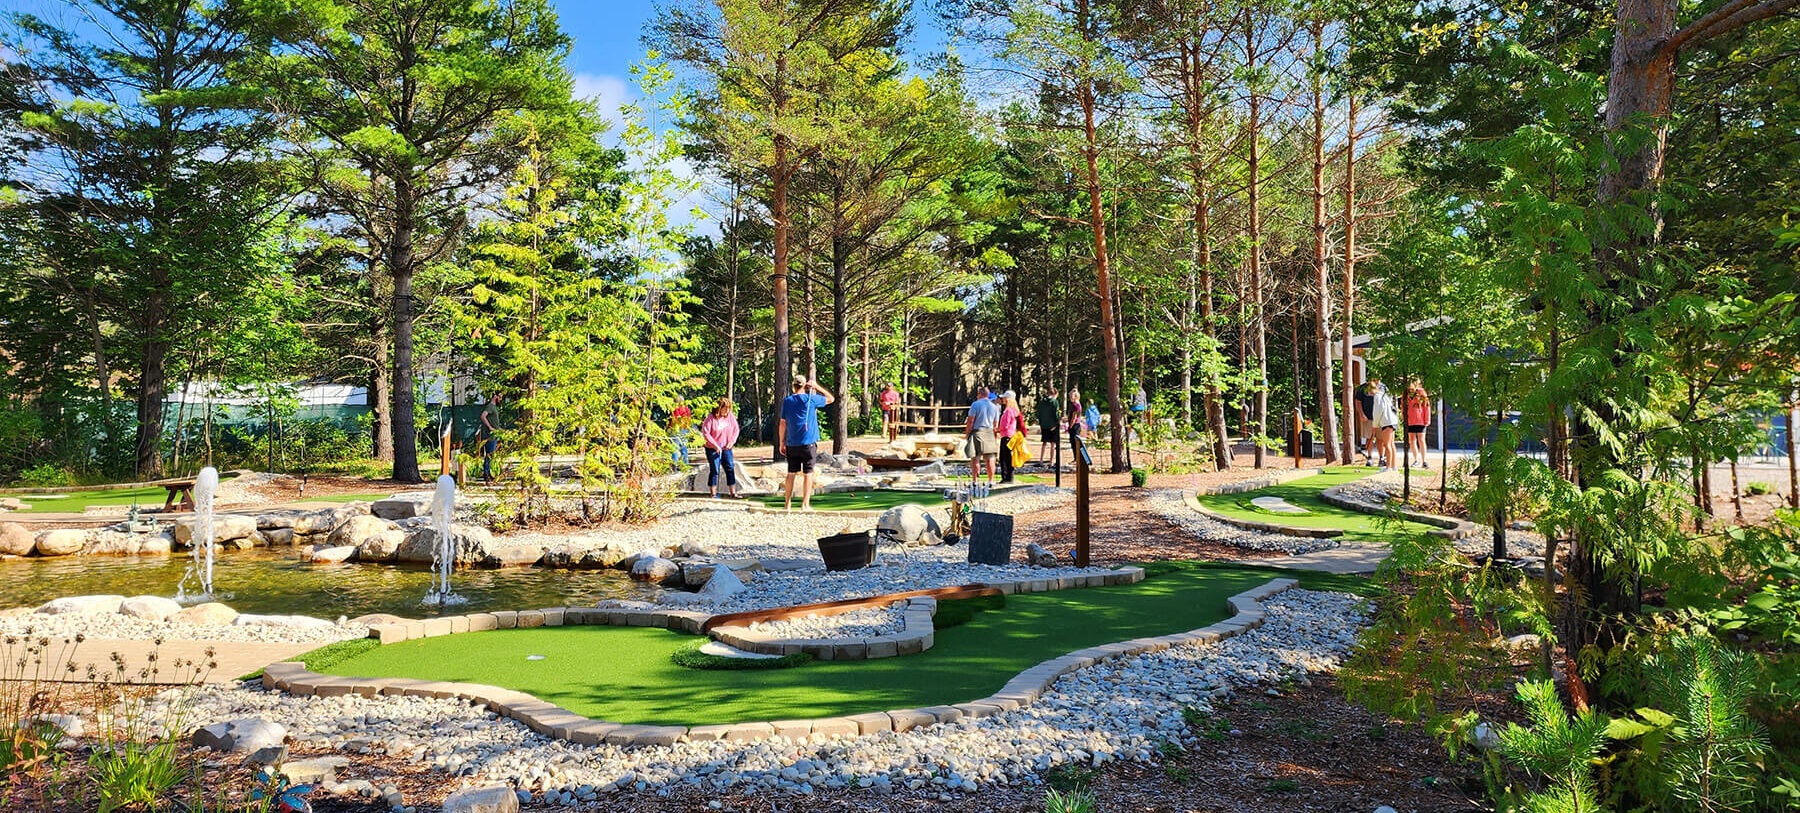 Majestic pine trees and water fountains in a pond delight players on the Evergreen Mini Golf Course